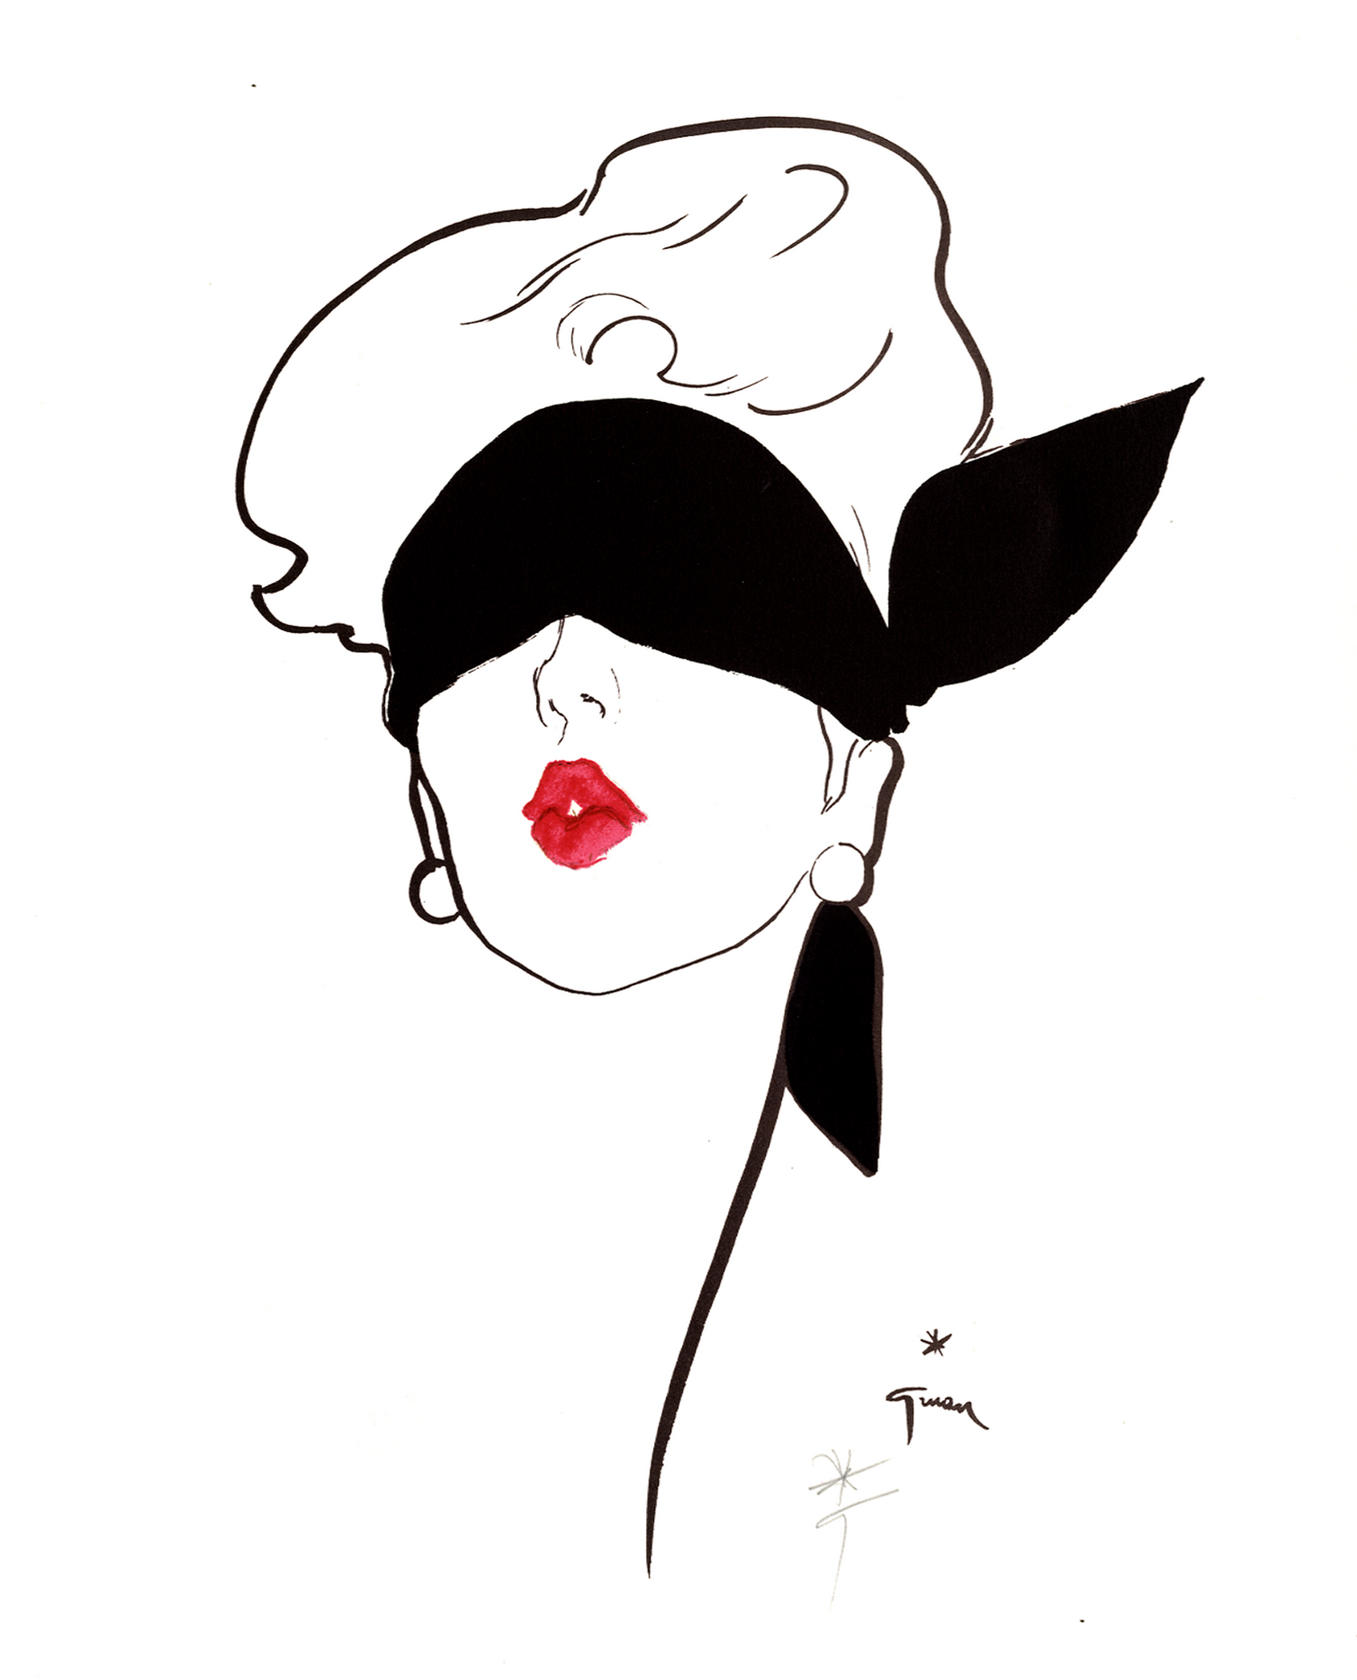 Rouge Baiser Blindfold by fashion artist René Gruau. Images: East Of Mayfair